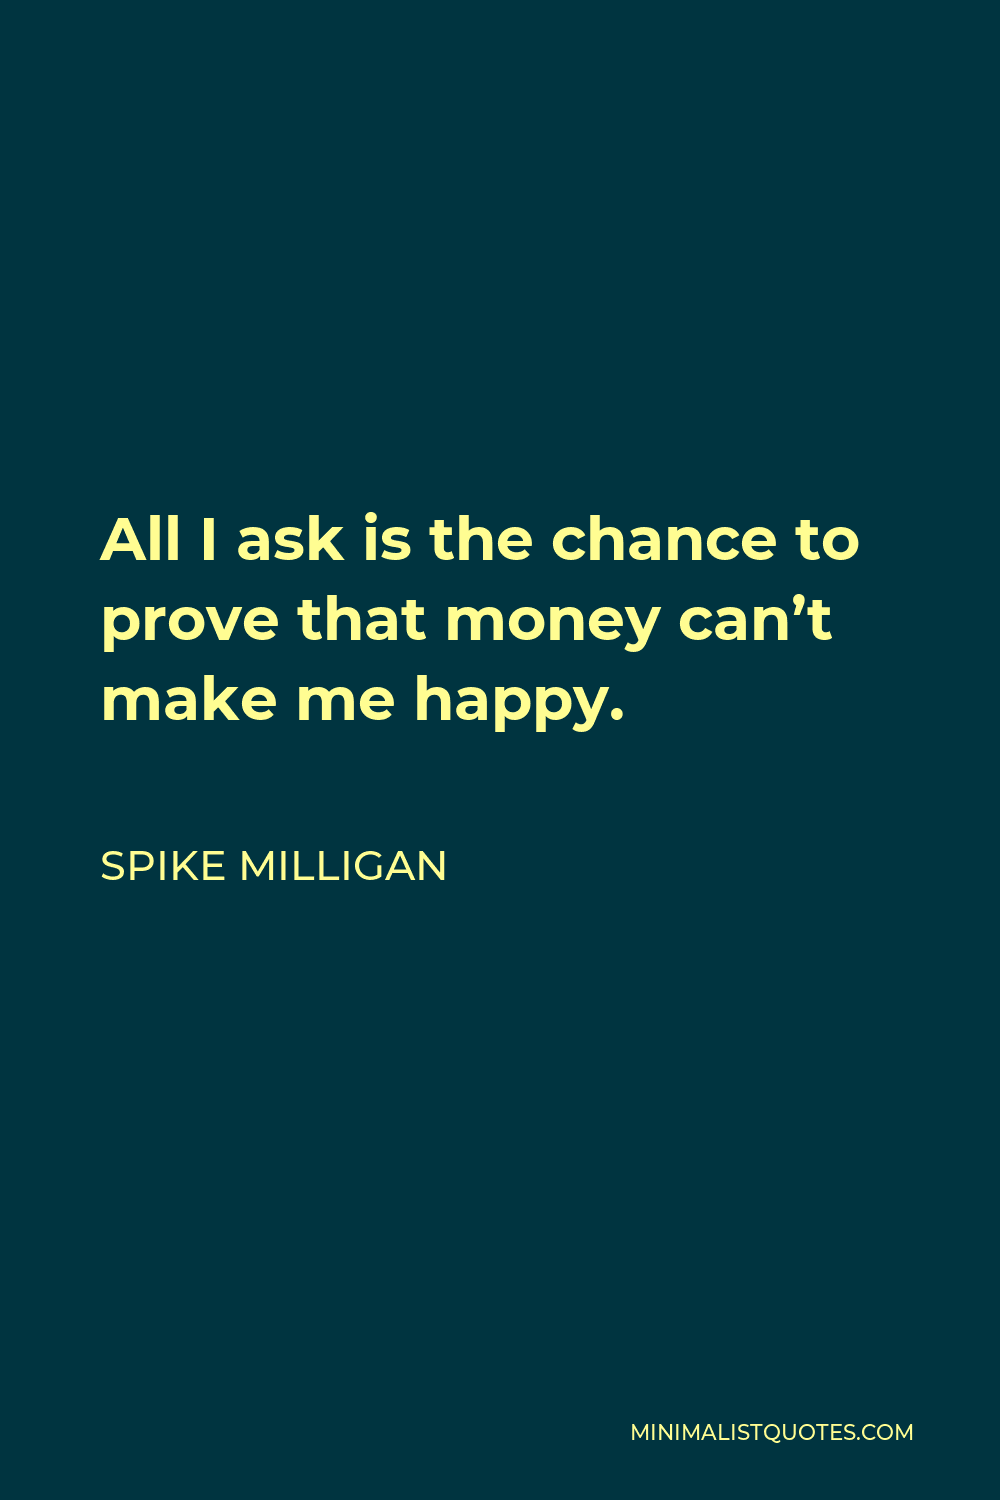 Spike Milligan Quote - All I ask is the chance to prove that money can’t make me happy.